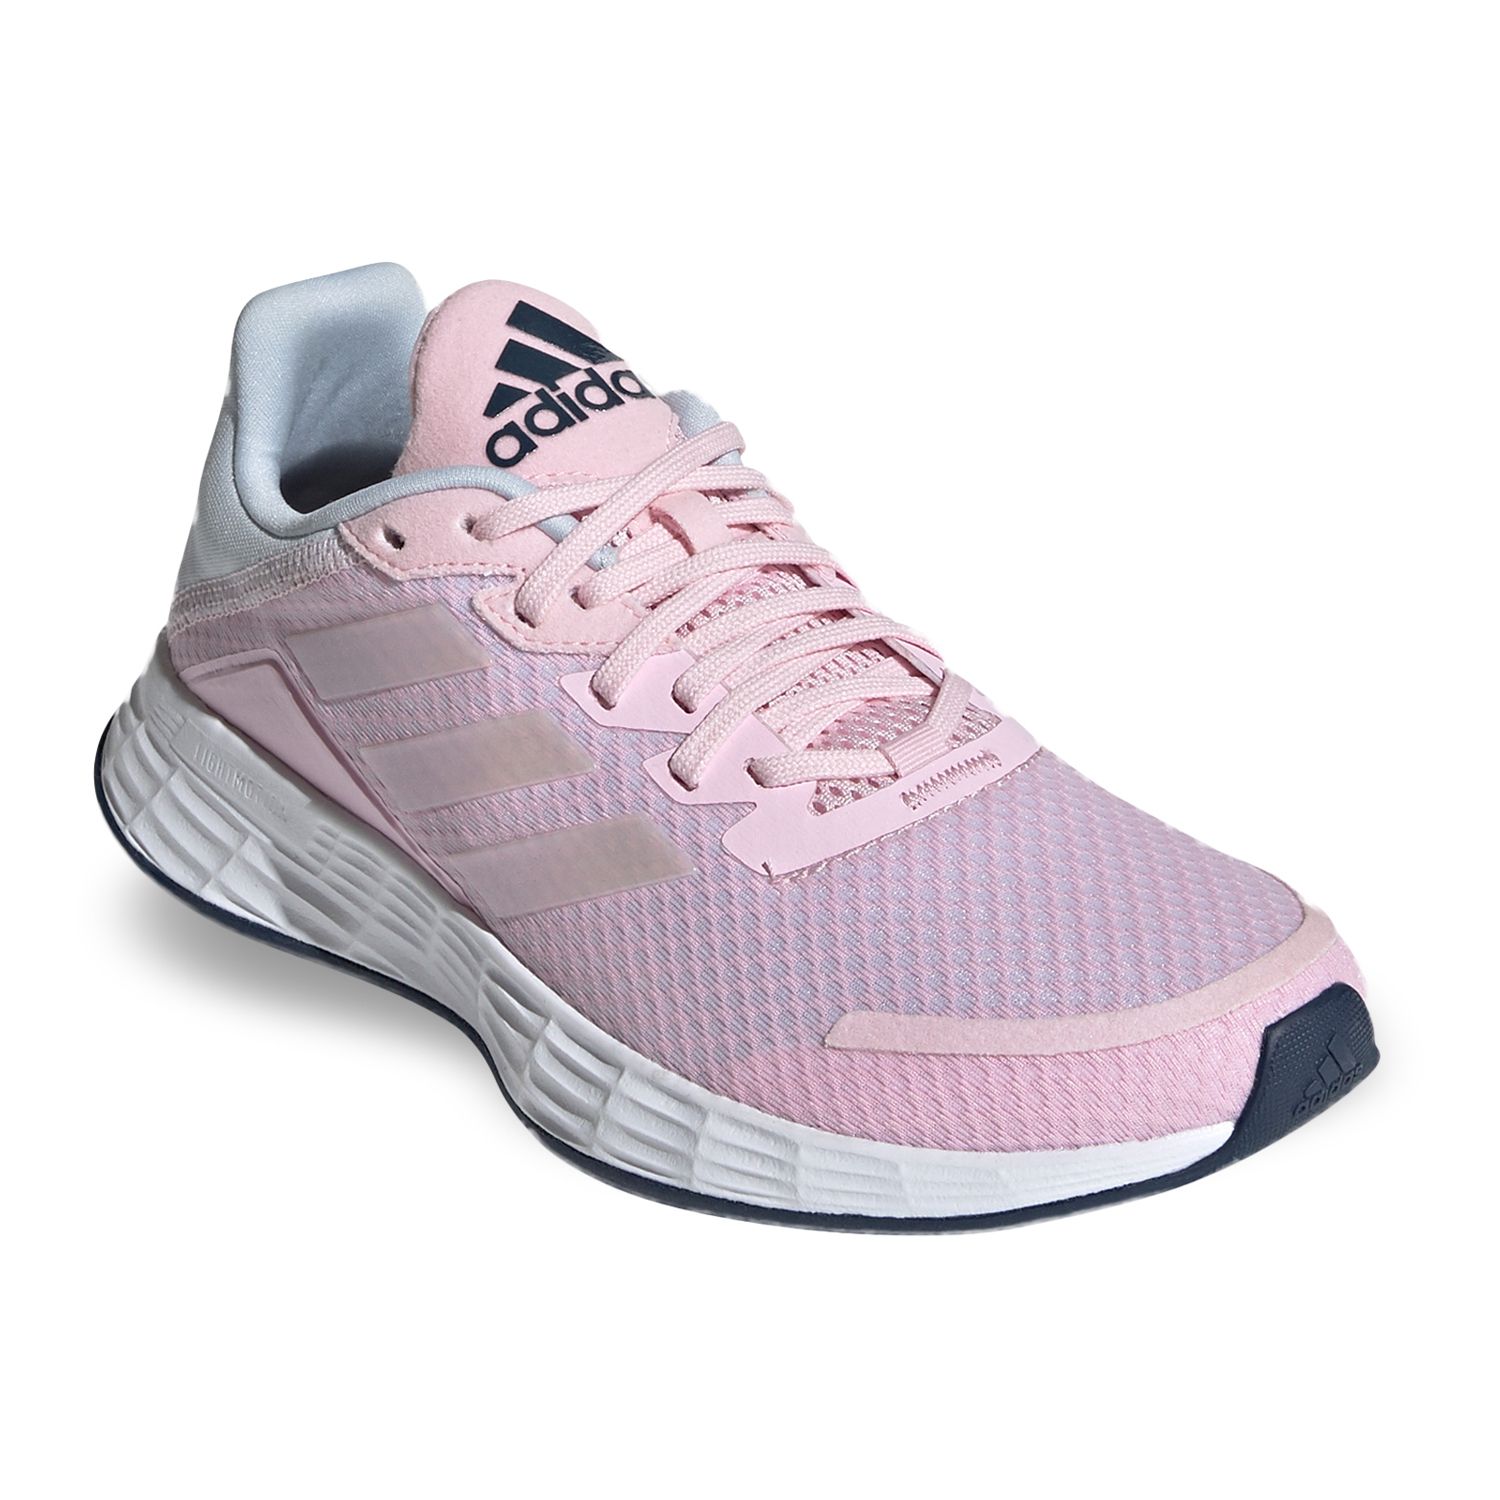 Pink Adidas Shoes | Kohl's